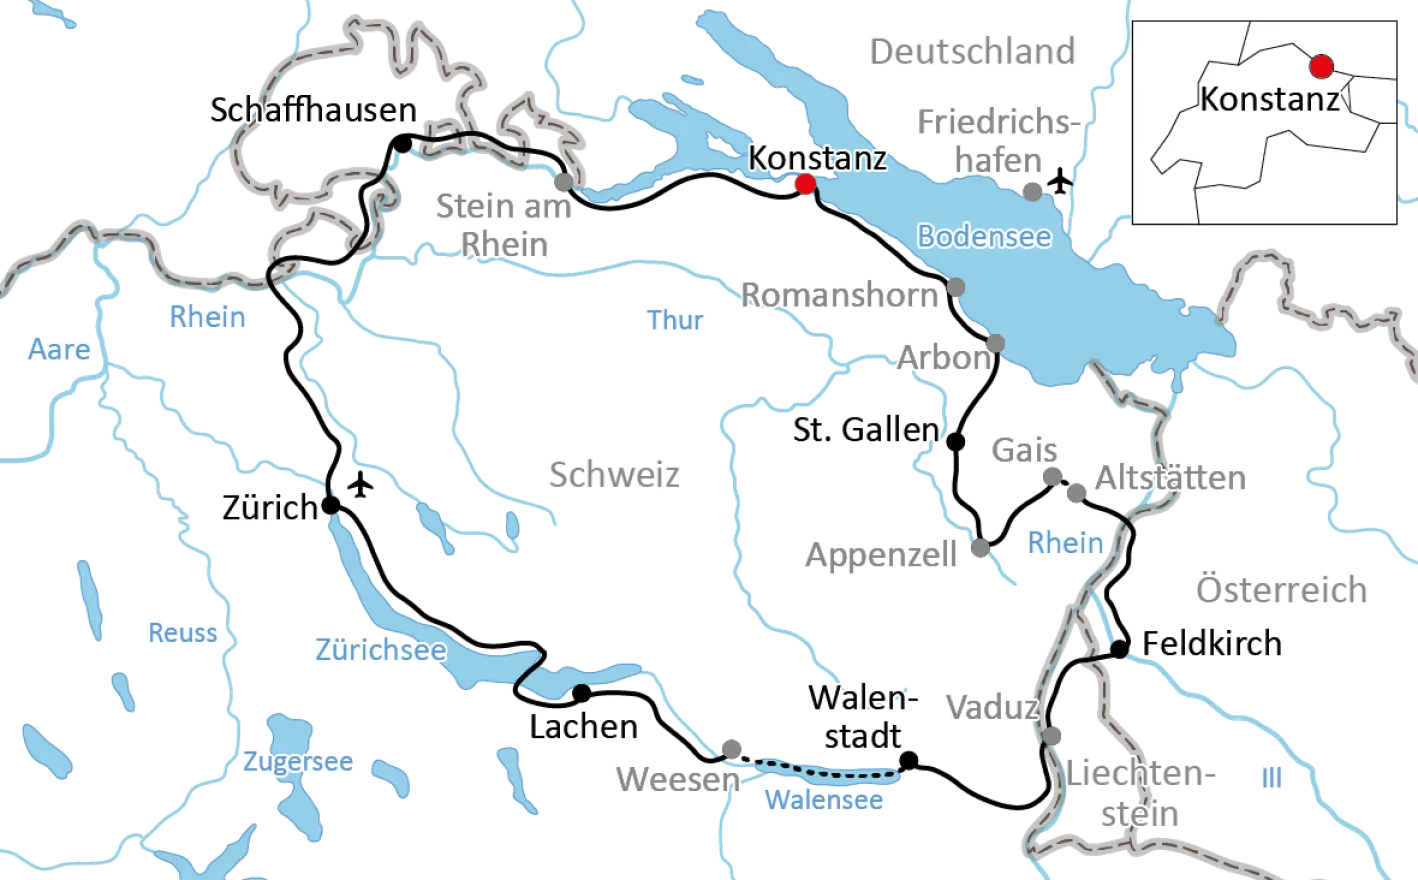 The Swiss Lakes Route